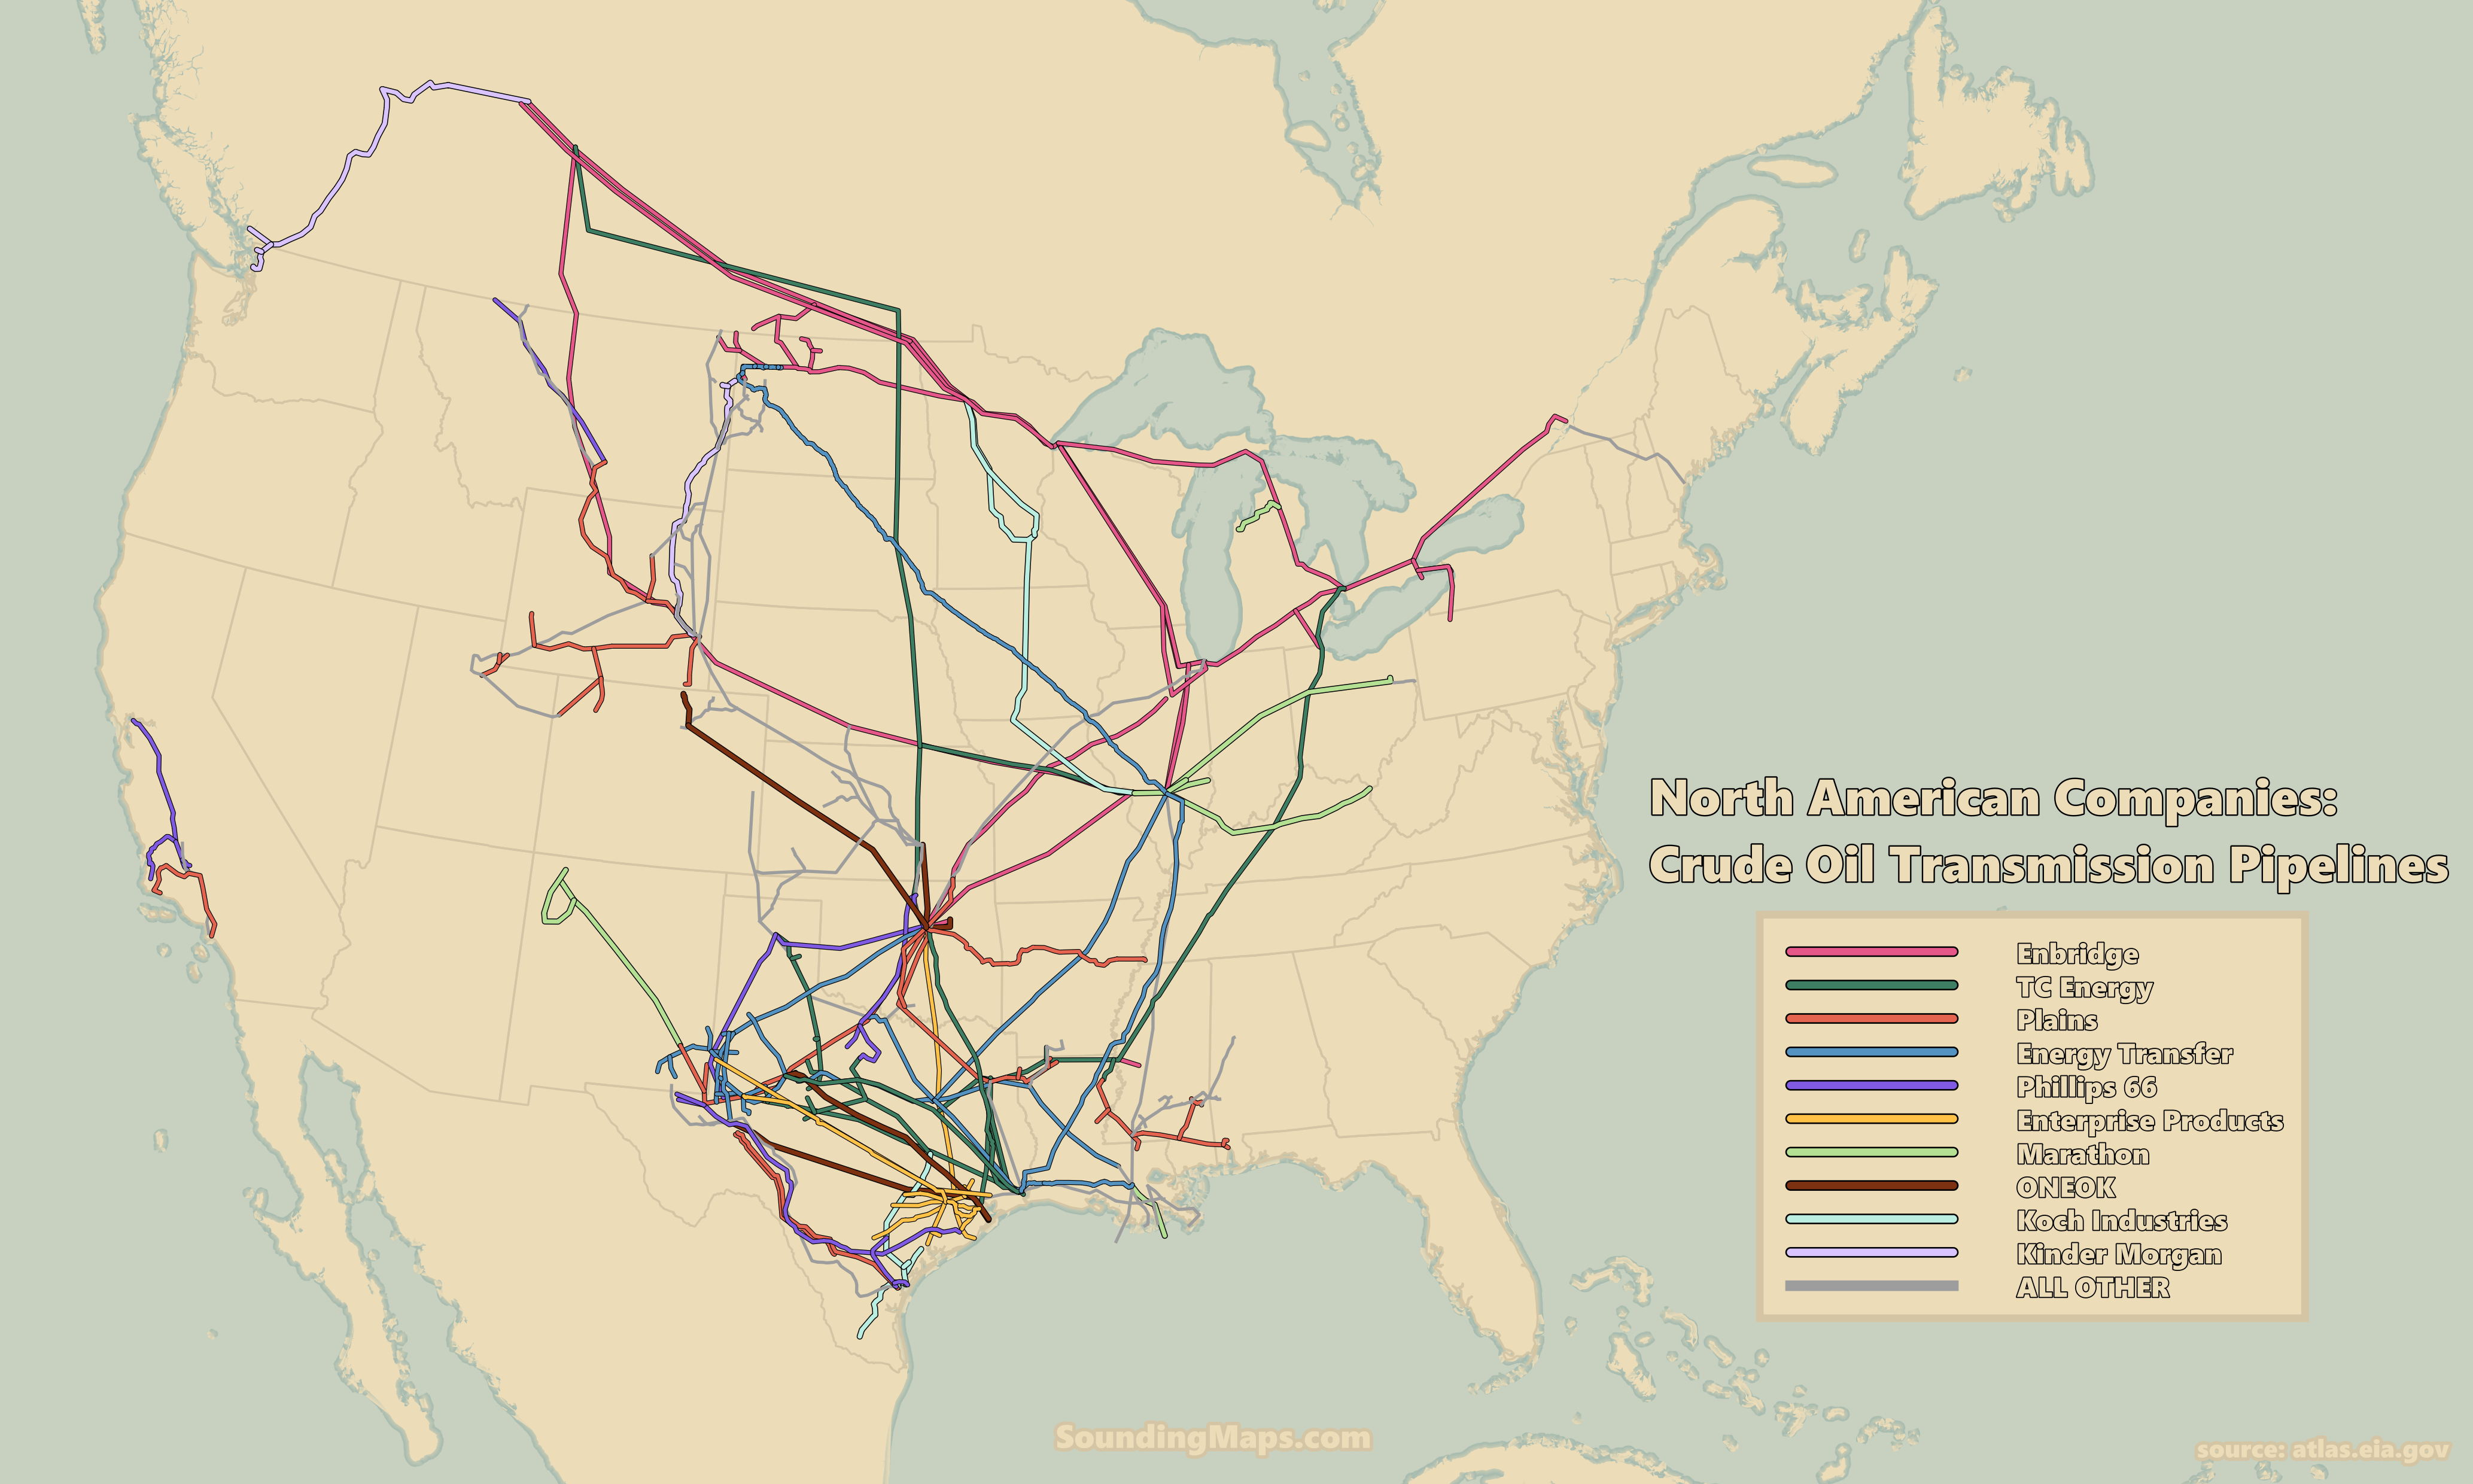 Map of North America's 10 largest midstream companies for crude oil pipelines